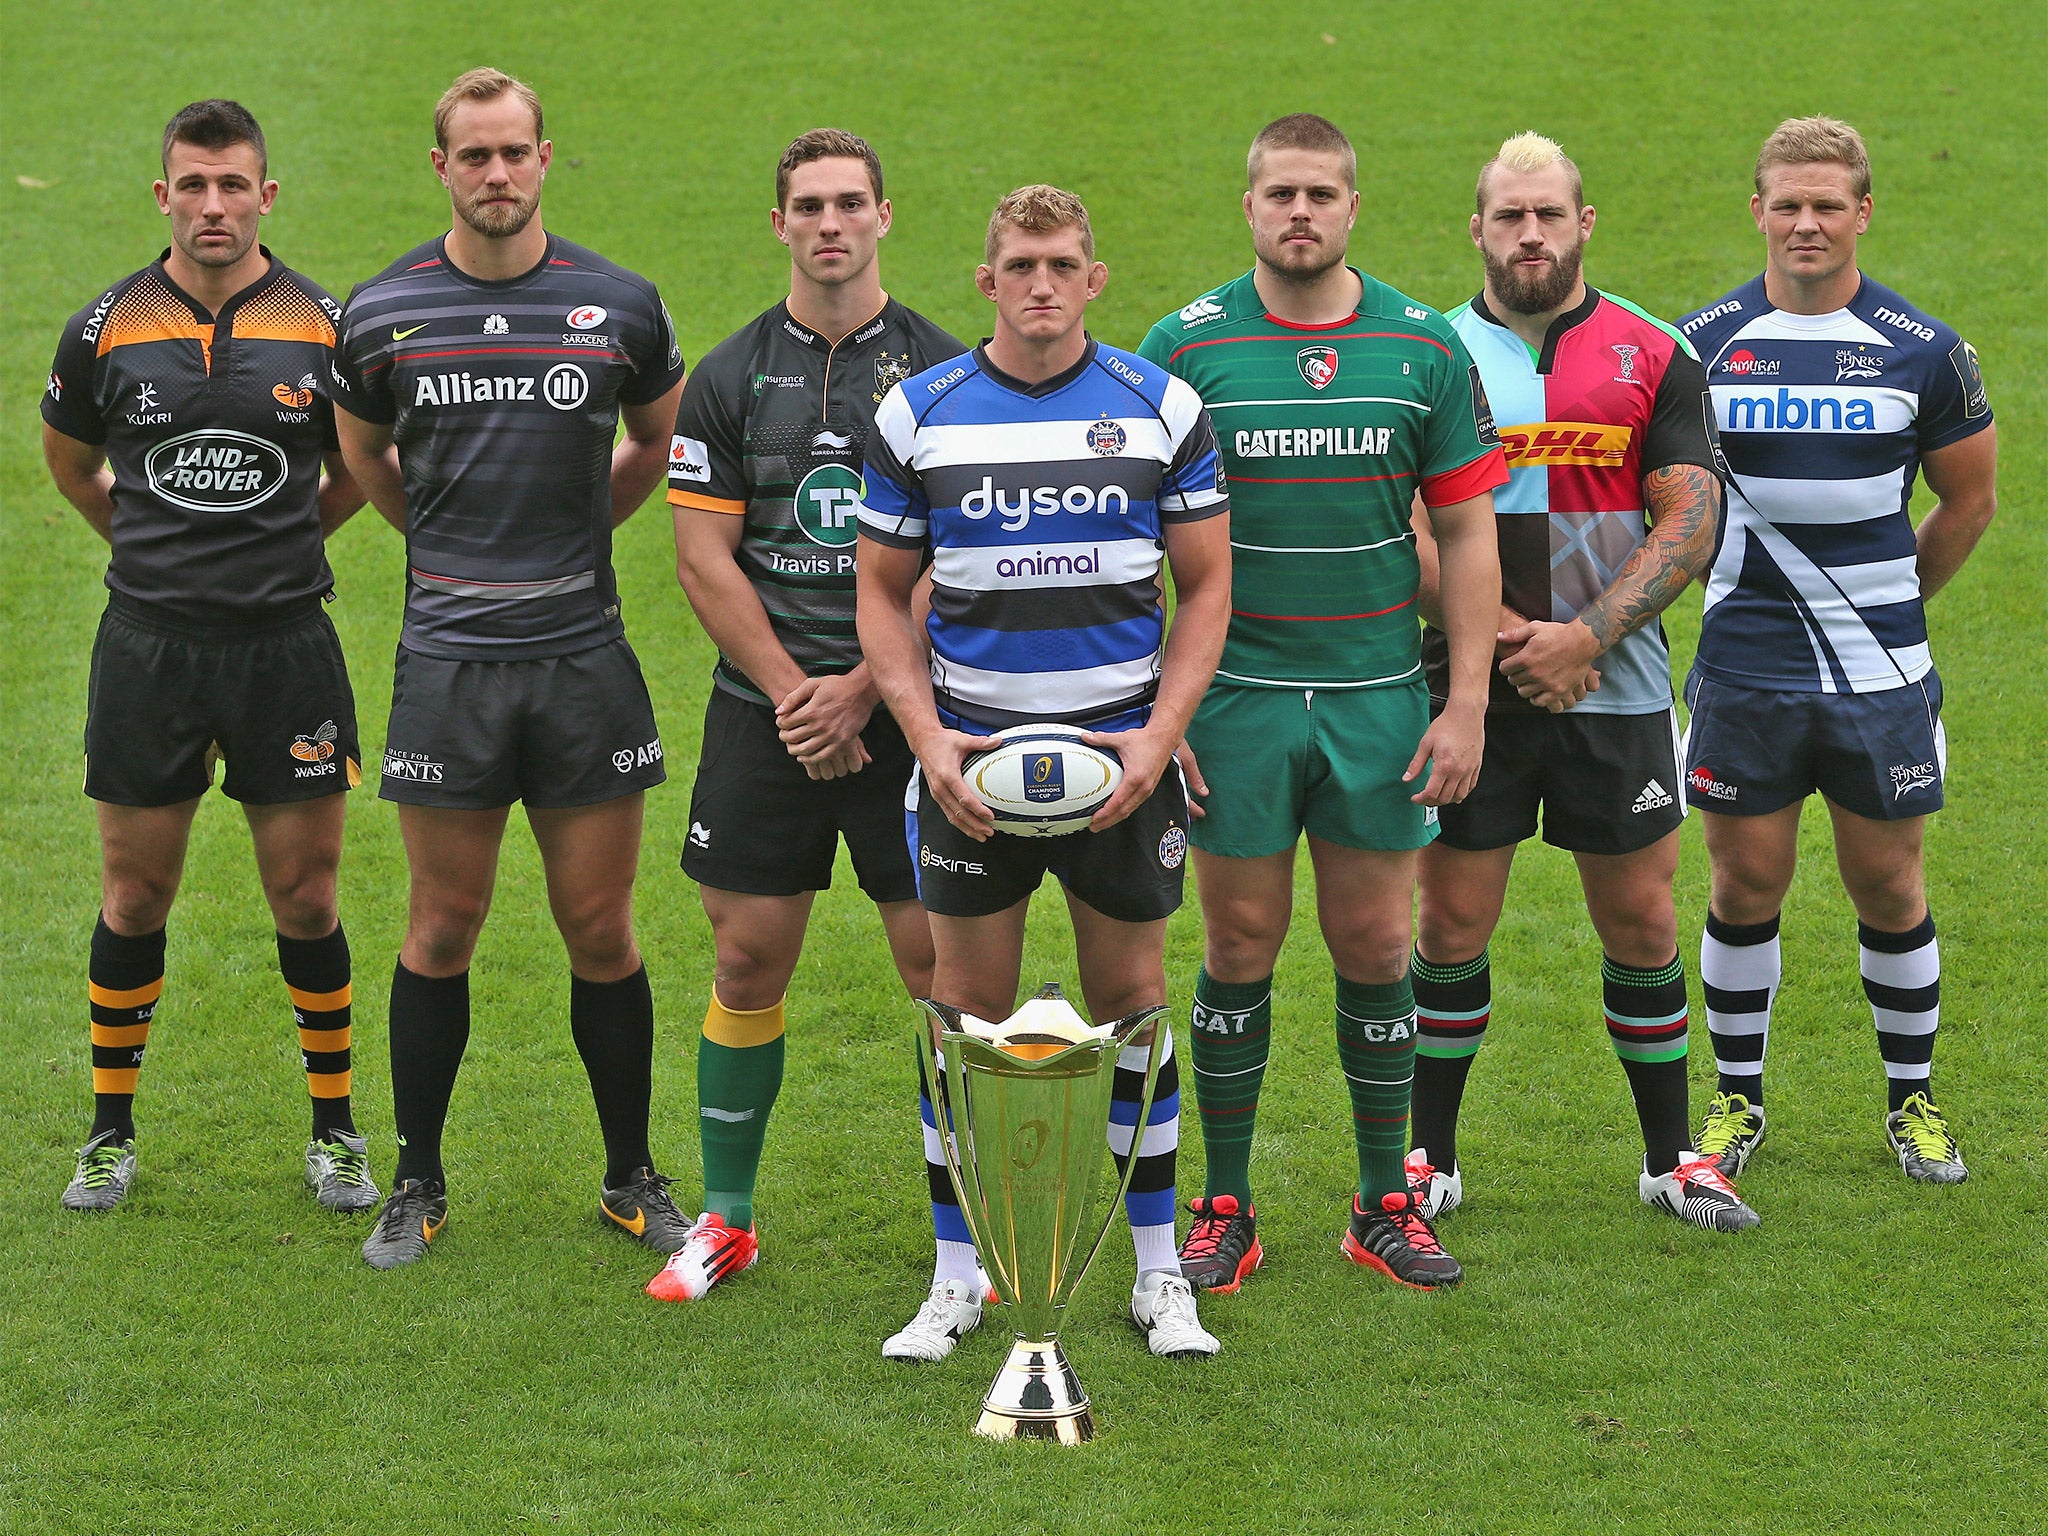 Left to right: Matt Mullan (Wasps), Alistair Hargreaves (Saracens), George North (Northamp-ton), Stuart Hooper (Bath), Ed Slater (Leicester), Joe Marler (Harlequins) and Dan Braid (Sale) pose with the European Rugby Champions Cup trophy